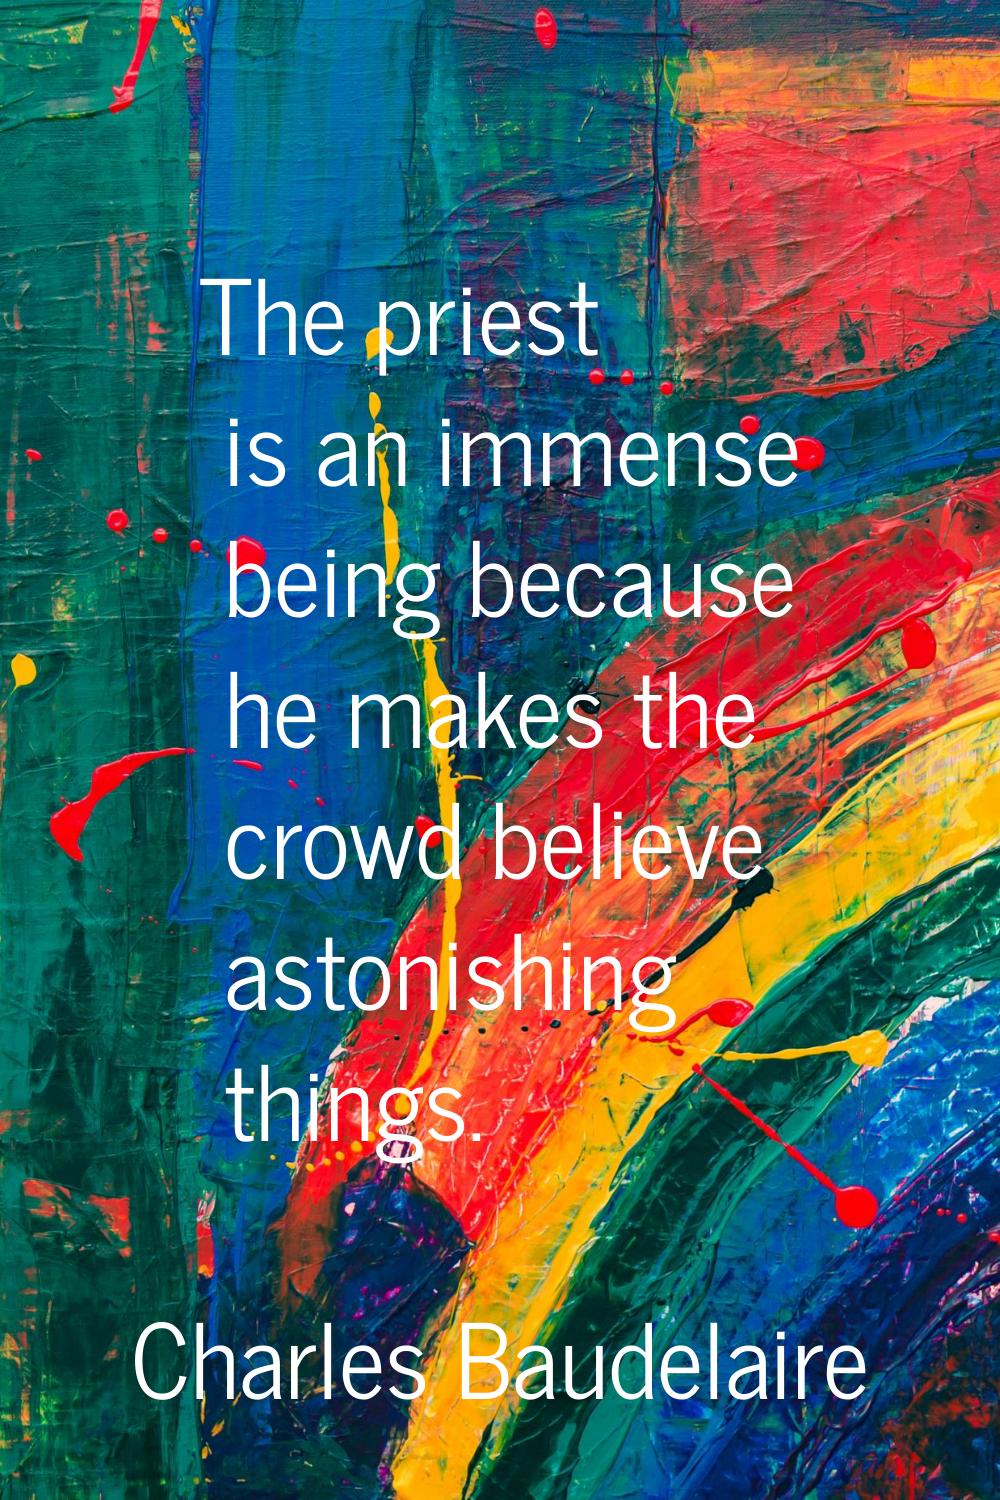 The priest is an immense being because he makes the crowd believe astonishing things.